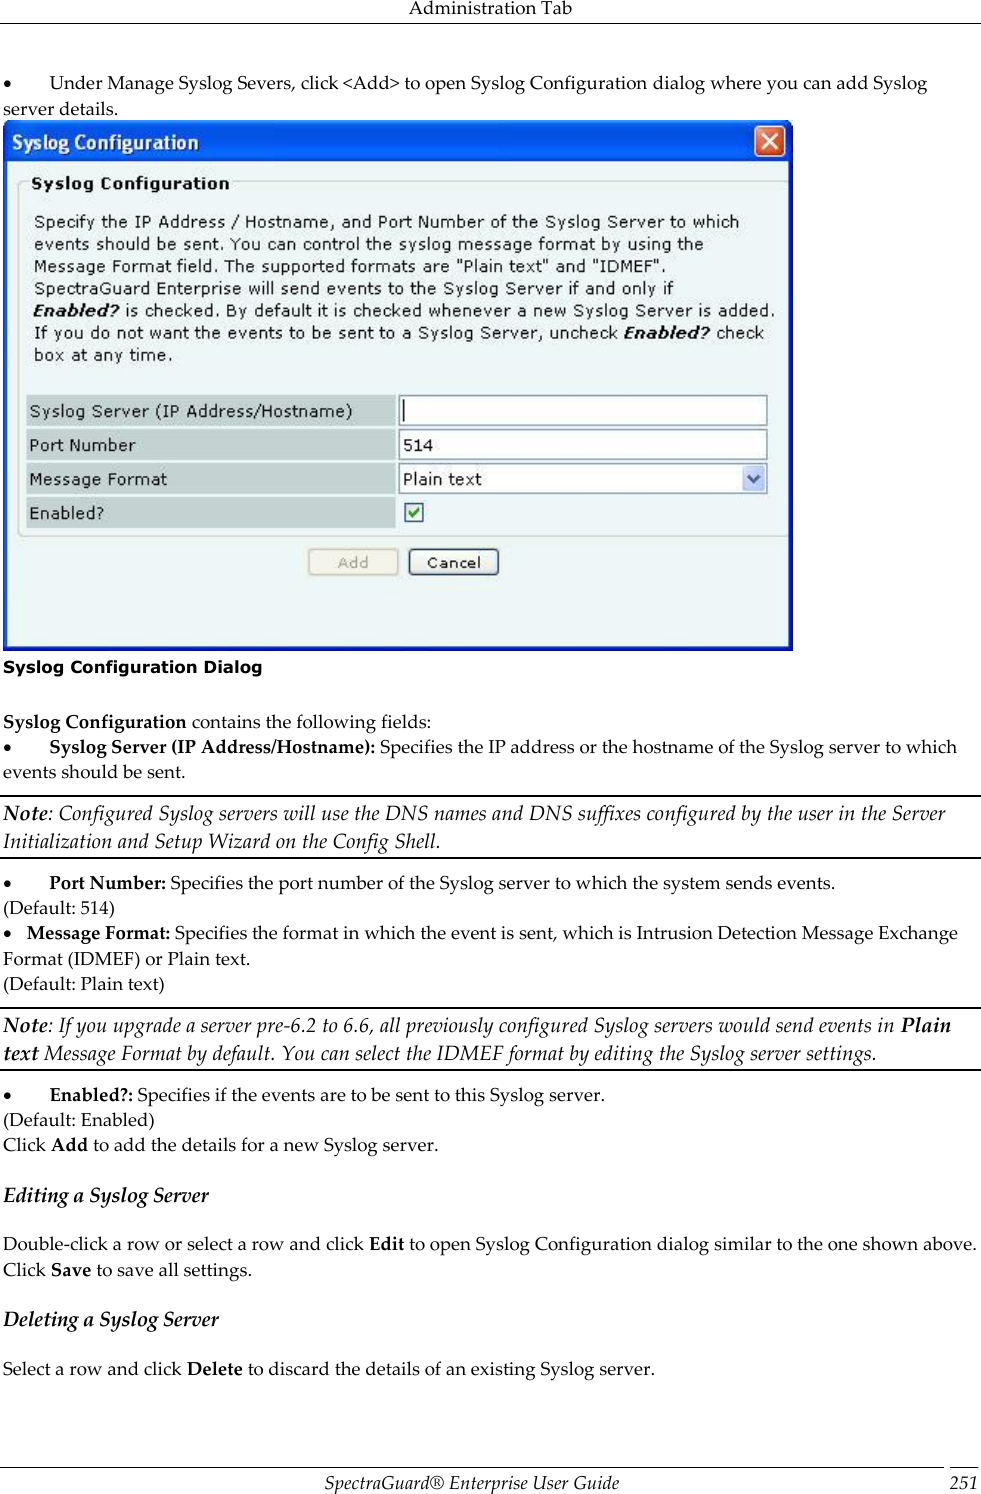 Administration Tab SpectraGuard®  Enterprise User Guide 251           Under Manage Syslog Severs, click &lt;Add&gt; to open Syslog Configuration dialog where you can add Syslog server details.  Syslog Configuration Dialog   Syslog Configuration contains the following fields:           Syslog Server (IP Address/Hostname): Specifies the IP address or the hostname of the Syslog server to which events should be sent. Note: Configured Syslog servers will use the DNS names and DNS suffixes configured by the user in the Server Initialization and Setup Wizard on the Config Shell.           Port Number: Specifies the port number of the Syslog server to which the system sends events. (Default: 514)     Message Format: Specifies the format in which the event is sent, which is Intrusion Detection Message Exchange Format (IDMEF) or Plain text. (Default: Plain text) Note: If you upgrade a server pre-6.2 to 6.6, all previously configured Syslog servers would send events in Plain text Message Format by default. You can select the IDMEF format by editing the Syslog server settings.           Enabled?: Specifies if the events are to be sent to this Syslog server. (Default: Enabled) Click Add to add the details for a new Syslog server. Editing a Syslog Server Double-click a row or select a row and click Edit to open Syslog Configuration dialog similar to the one shown above. Click Save to save all settings. Deleting a Syslog Server Select a row and click Delete to discard the details of an existing Syslog server. 